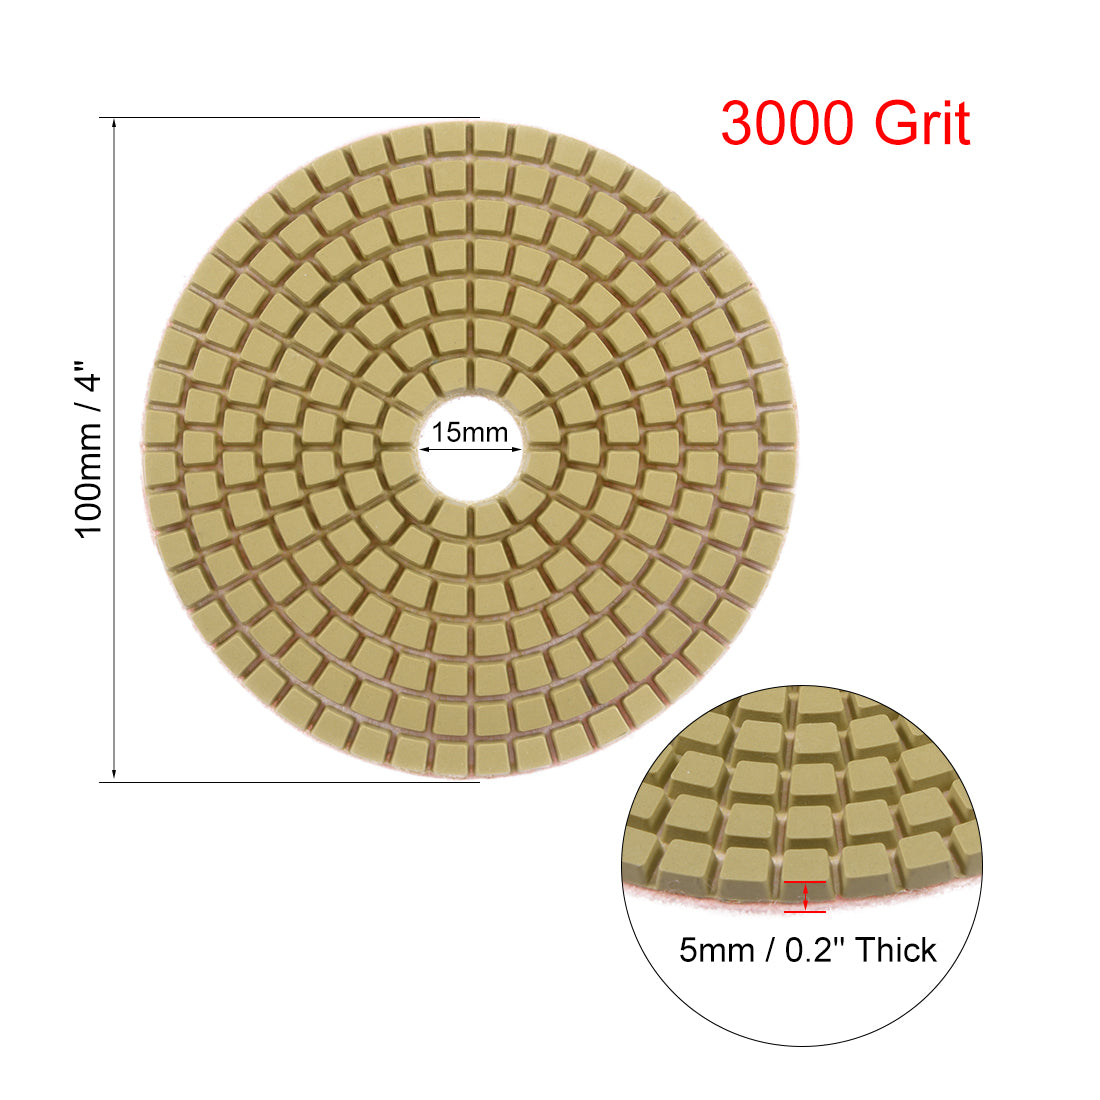 Uxcell Uxcell Diamond Polishing Sanding Grinding Pads Discs 4 Inch Grit 3000 10 Pcs for Granite Concrete Stone Marble